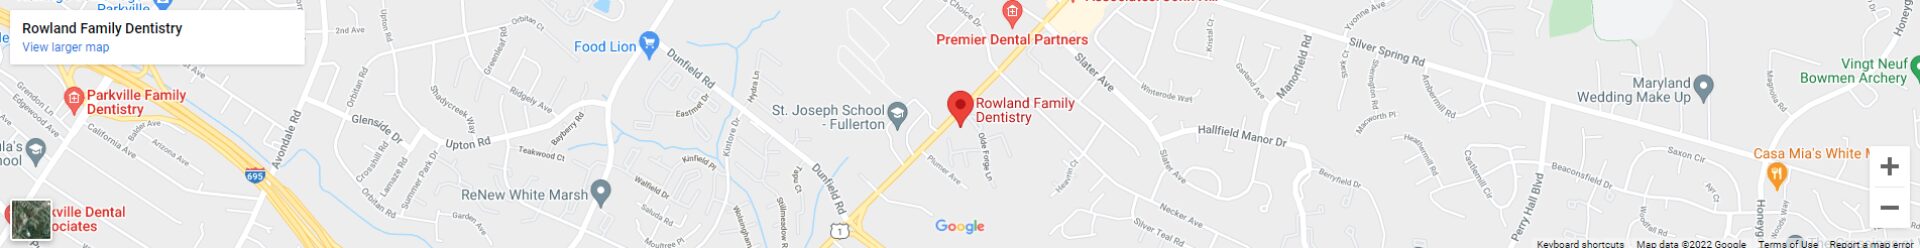 A map of rowland family dentistry